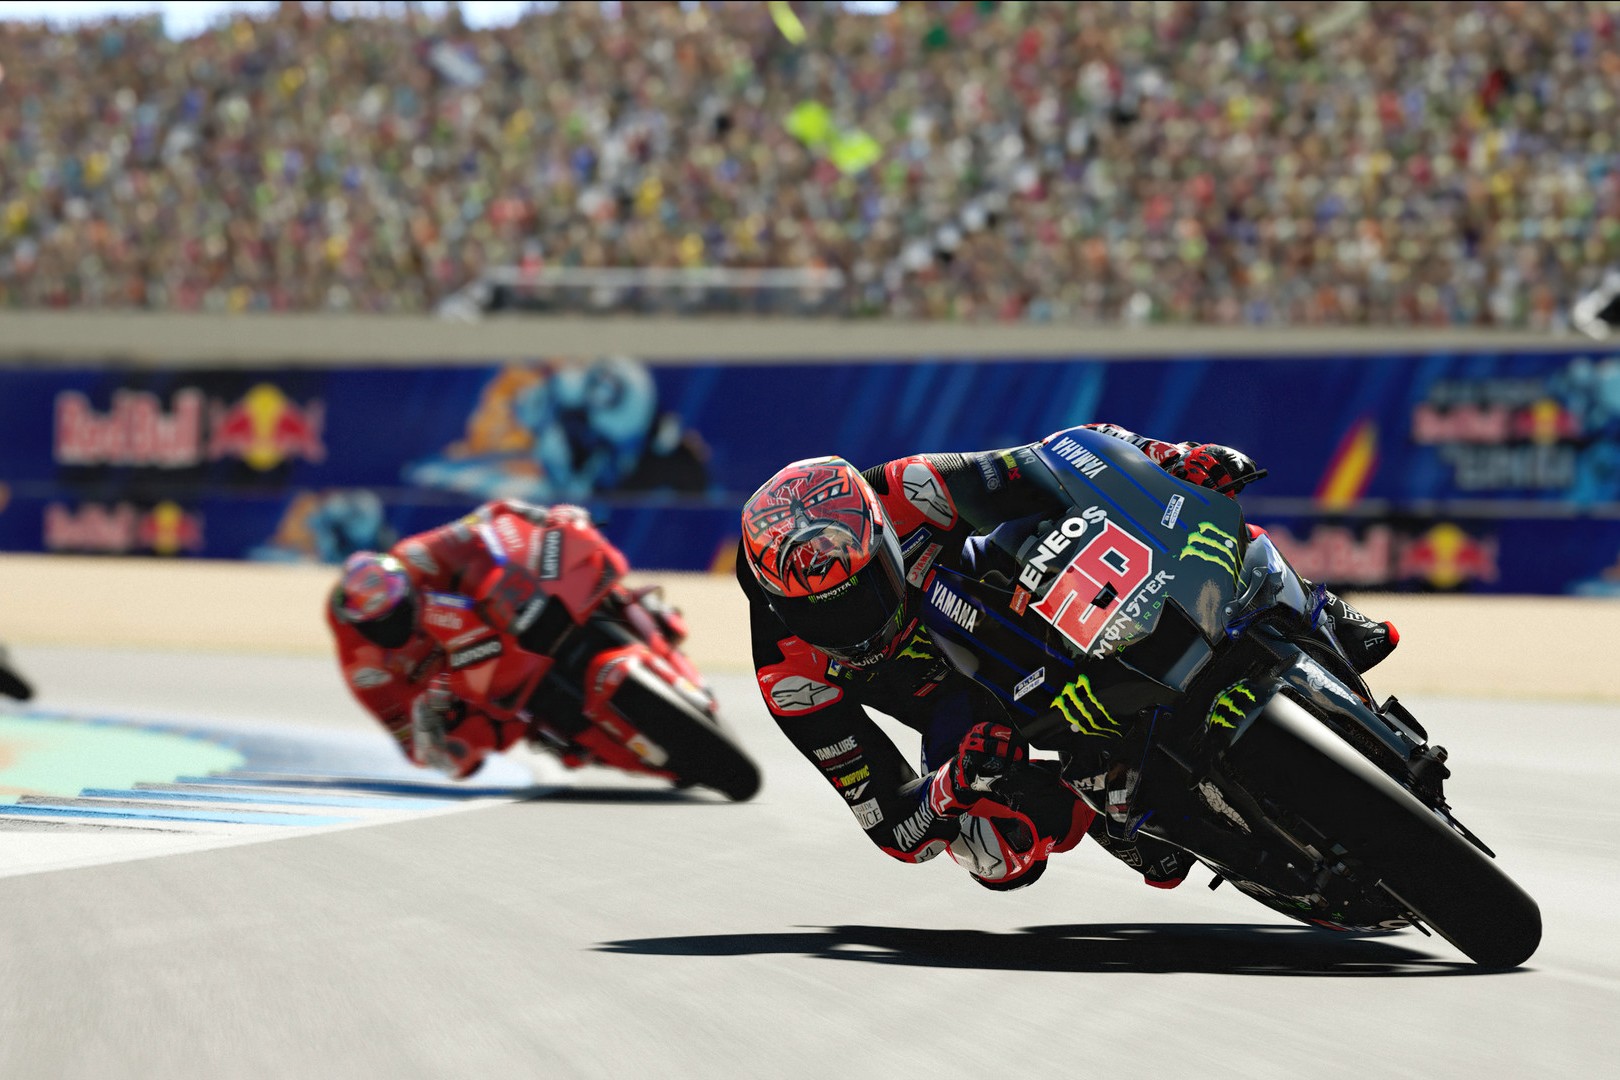 motogp streaming channels free